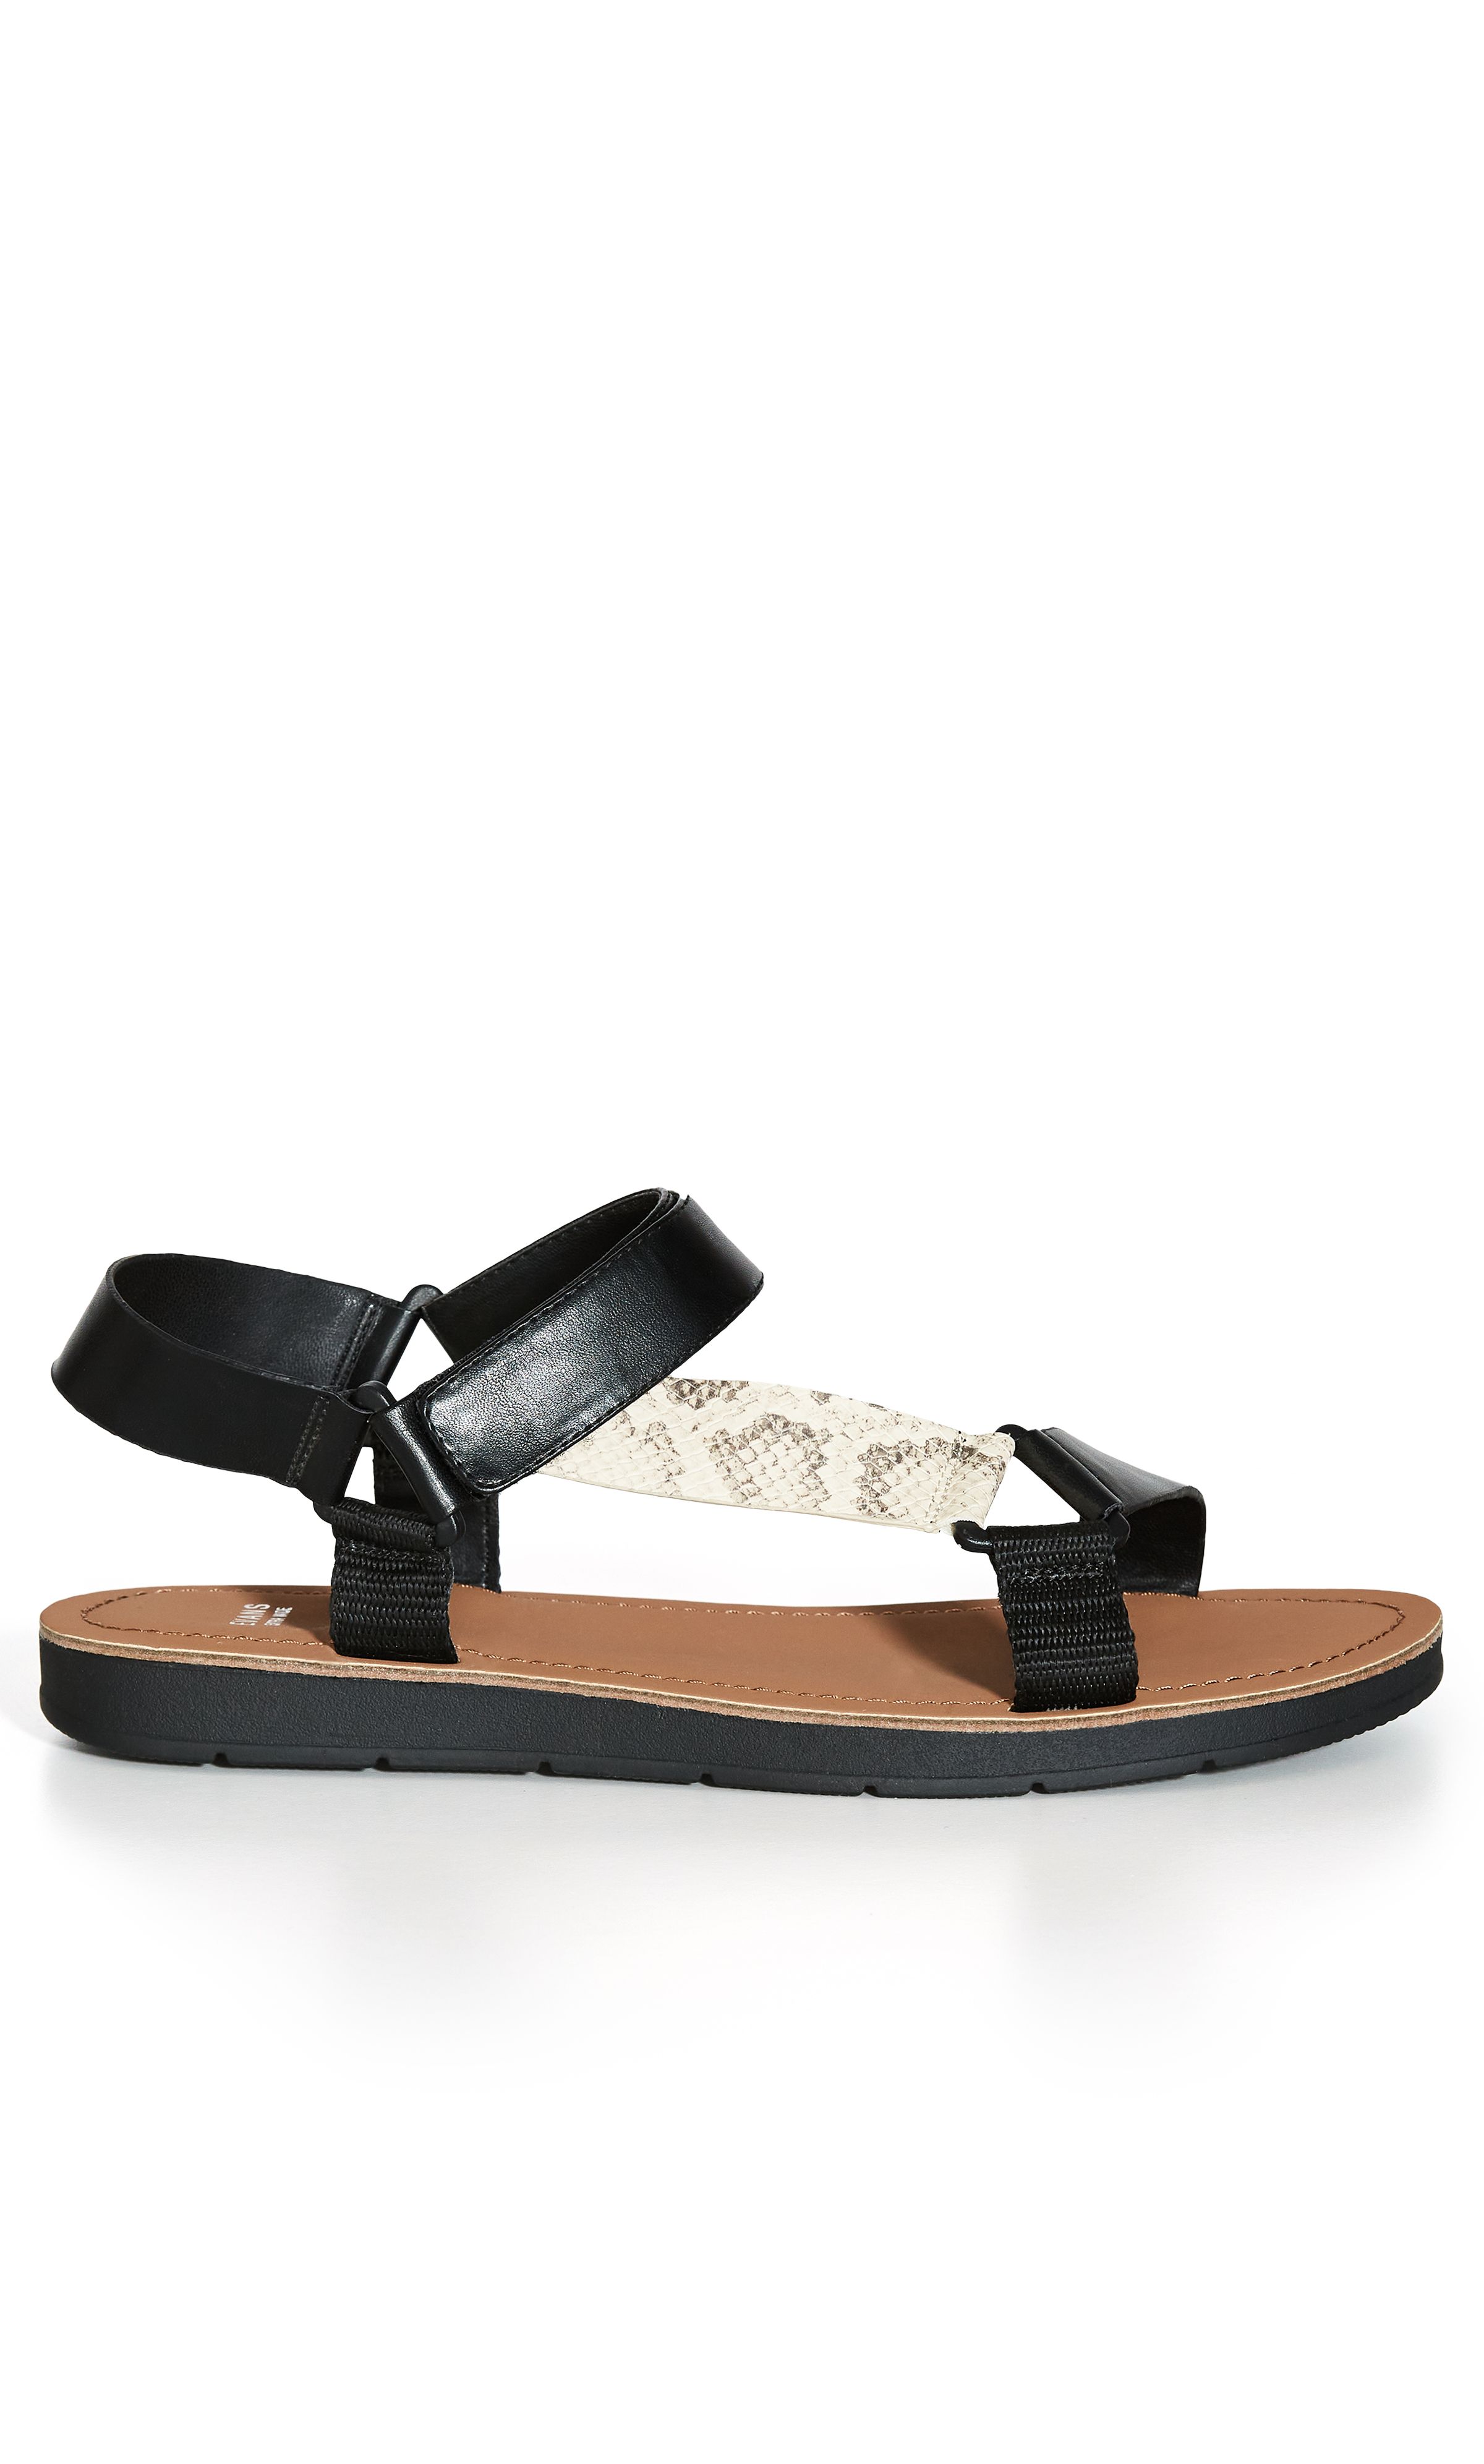 Keep on-trend this summer in the chunky stylings of our Snake Sporty Strap Sandal! Featuring an easy velcro closure and extra wide fit, these shoes are a seamless balance of comfort and style. Key Features Include: - Round open toe - Thick strapping - Velcro closure - Thick cushioned sole Upstyle with a flirty wrap dress and cute underarm bag.